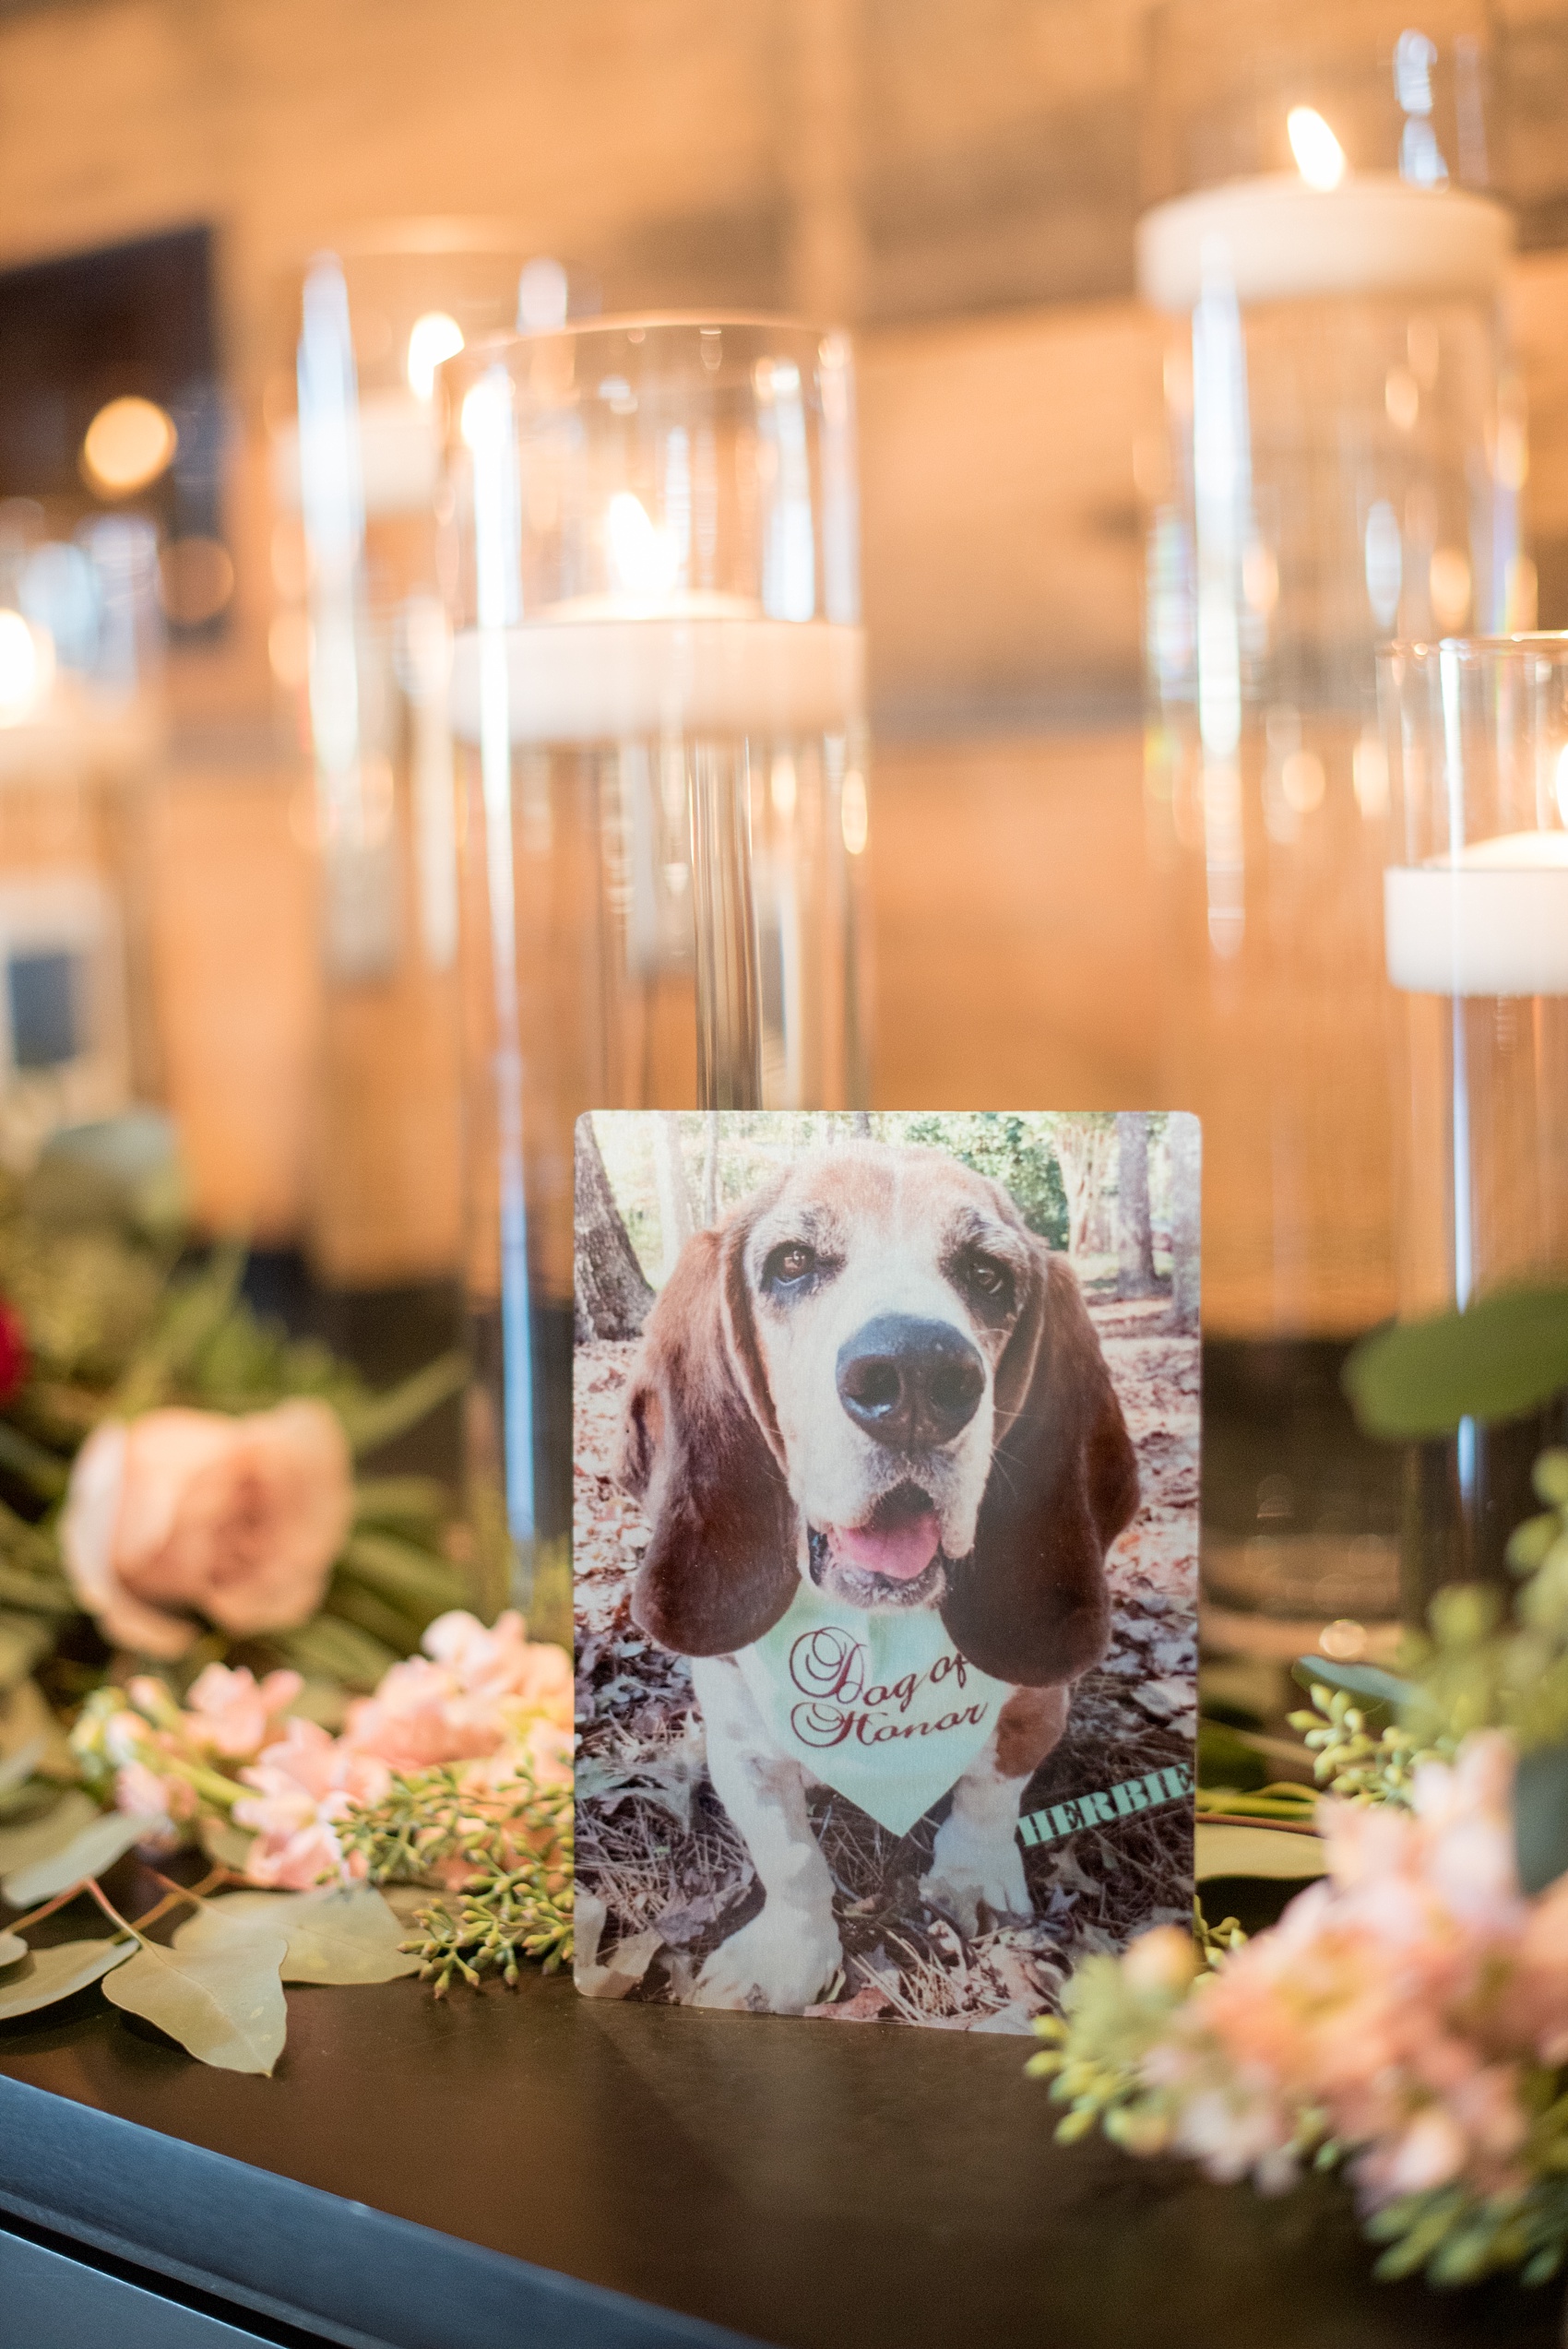 Mikkel Paige Photography photo of a wedding at The Rickhouse, NC. A picture of the bride's family Basset Hound dog with a "Dog of Honor" bandana.